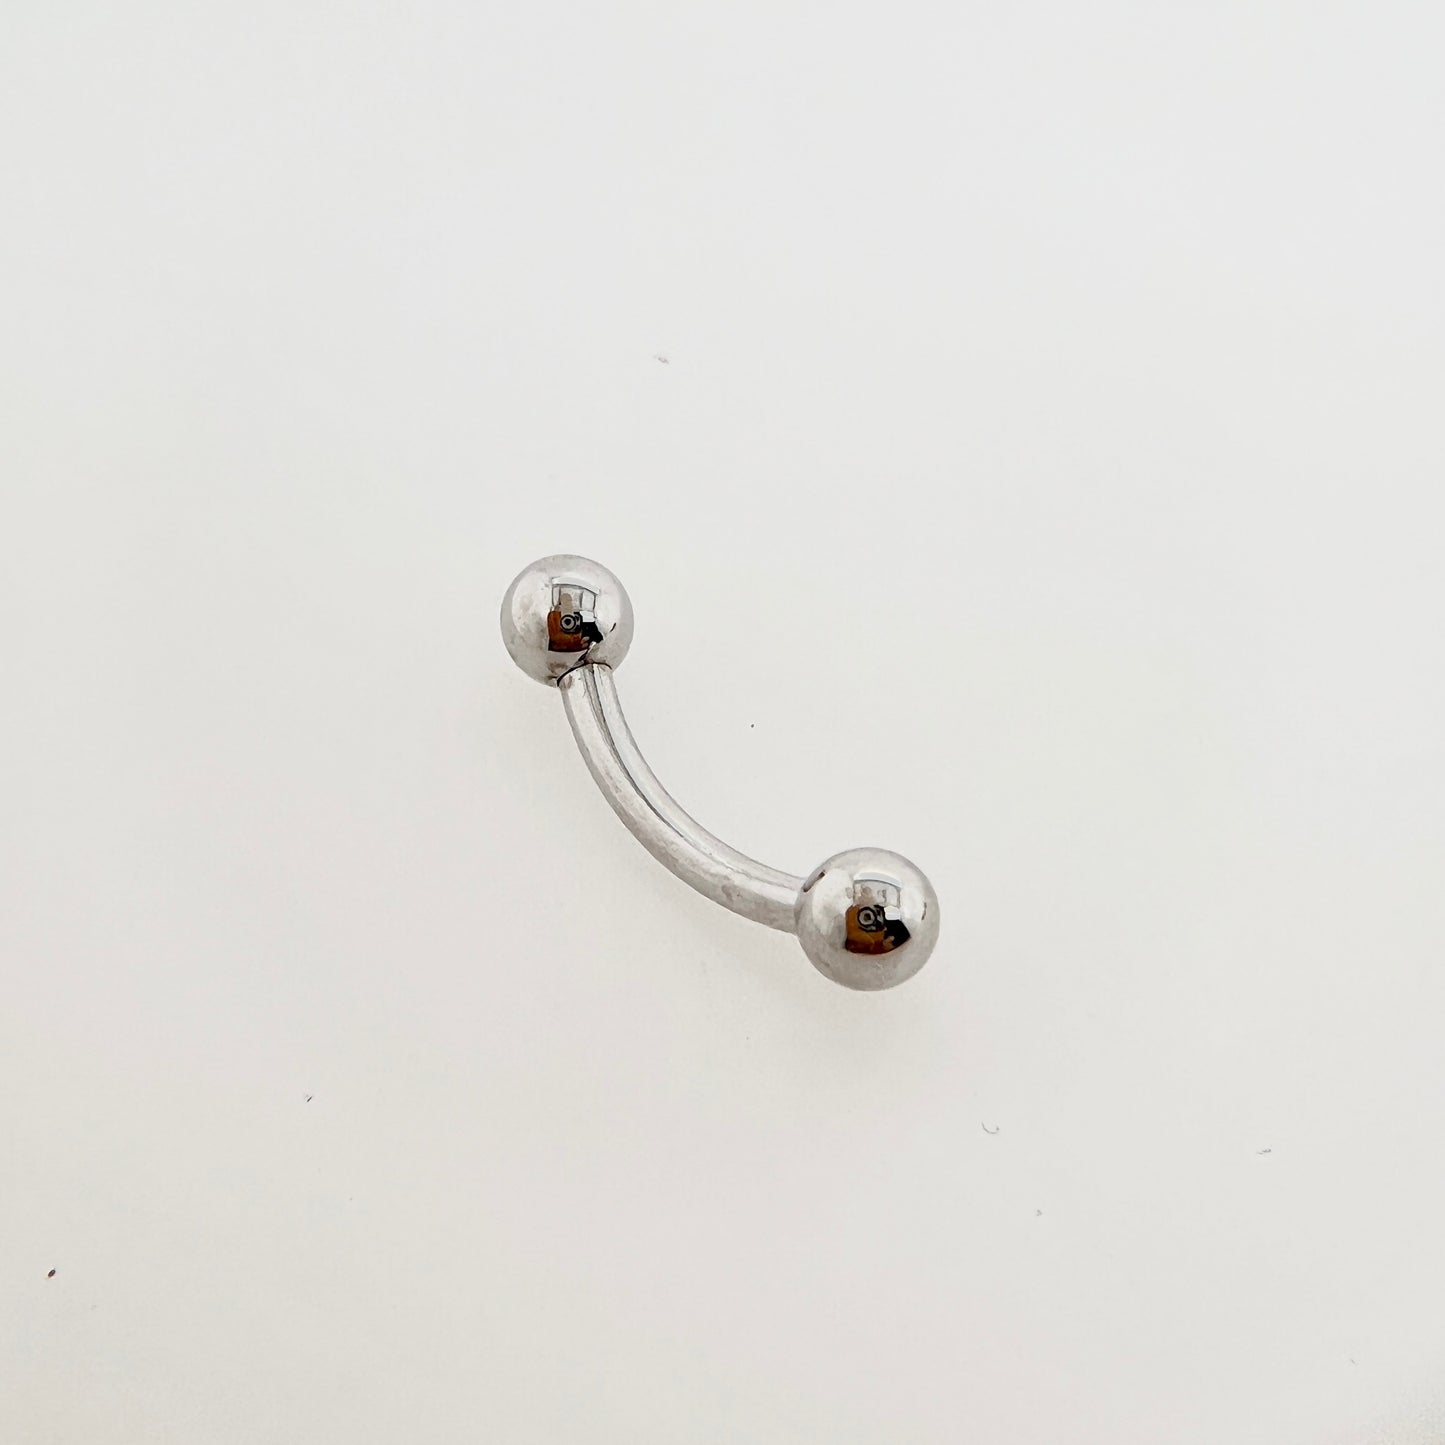 14g 3/8" Curved Barbell with 5/32" Beads